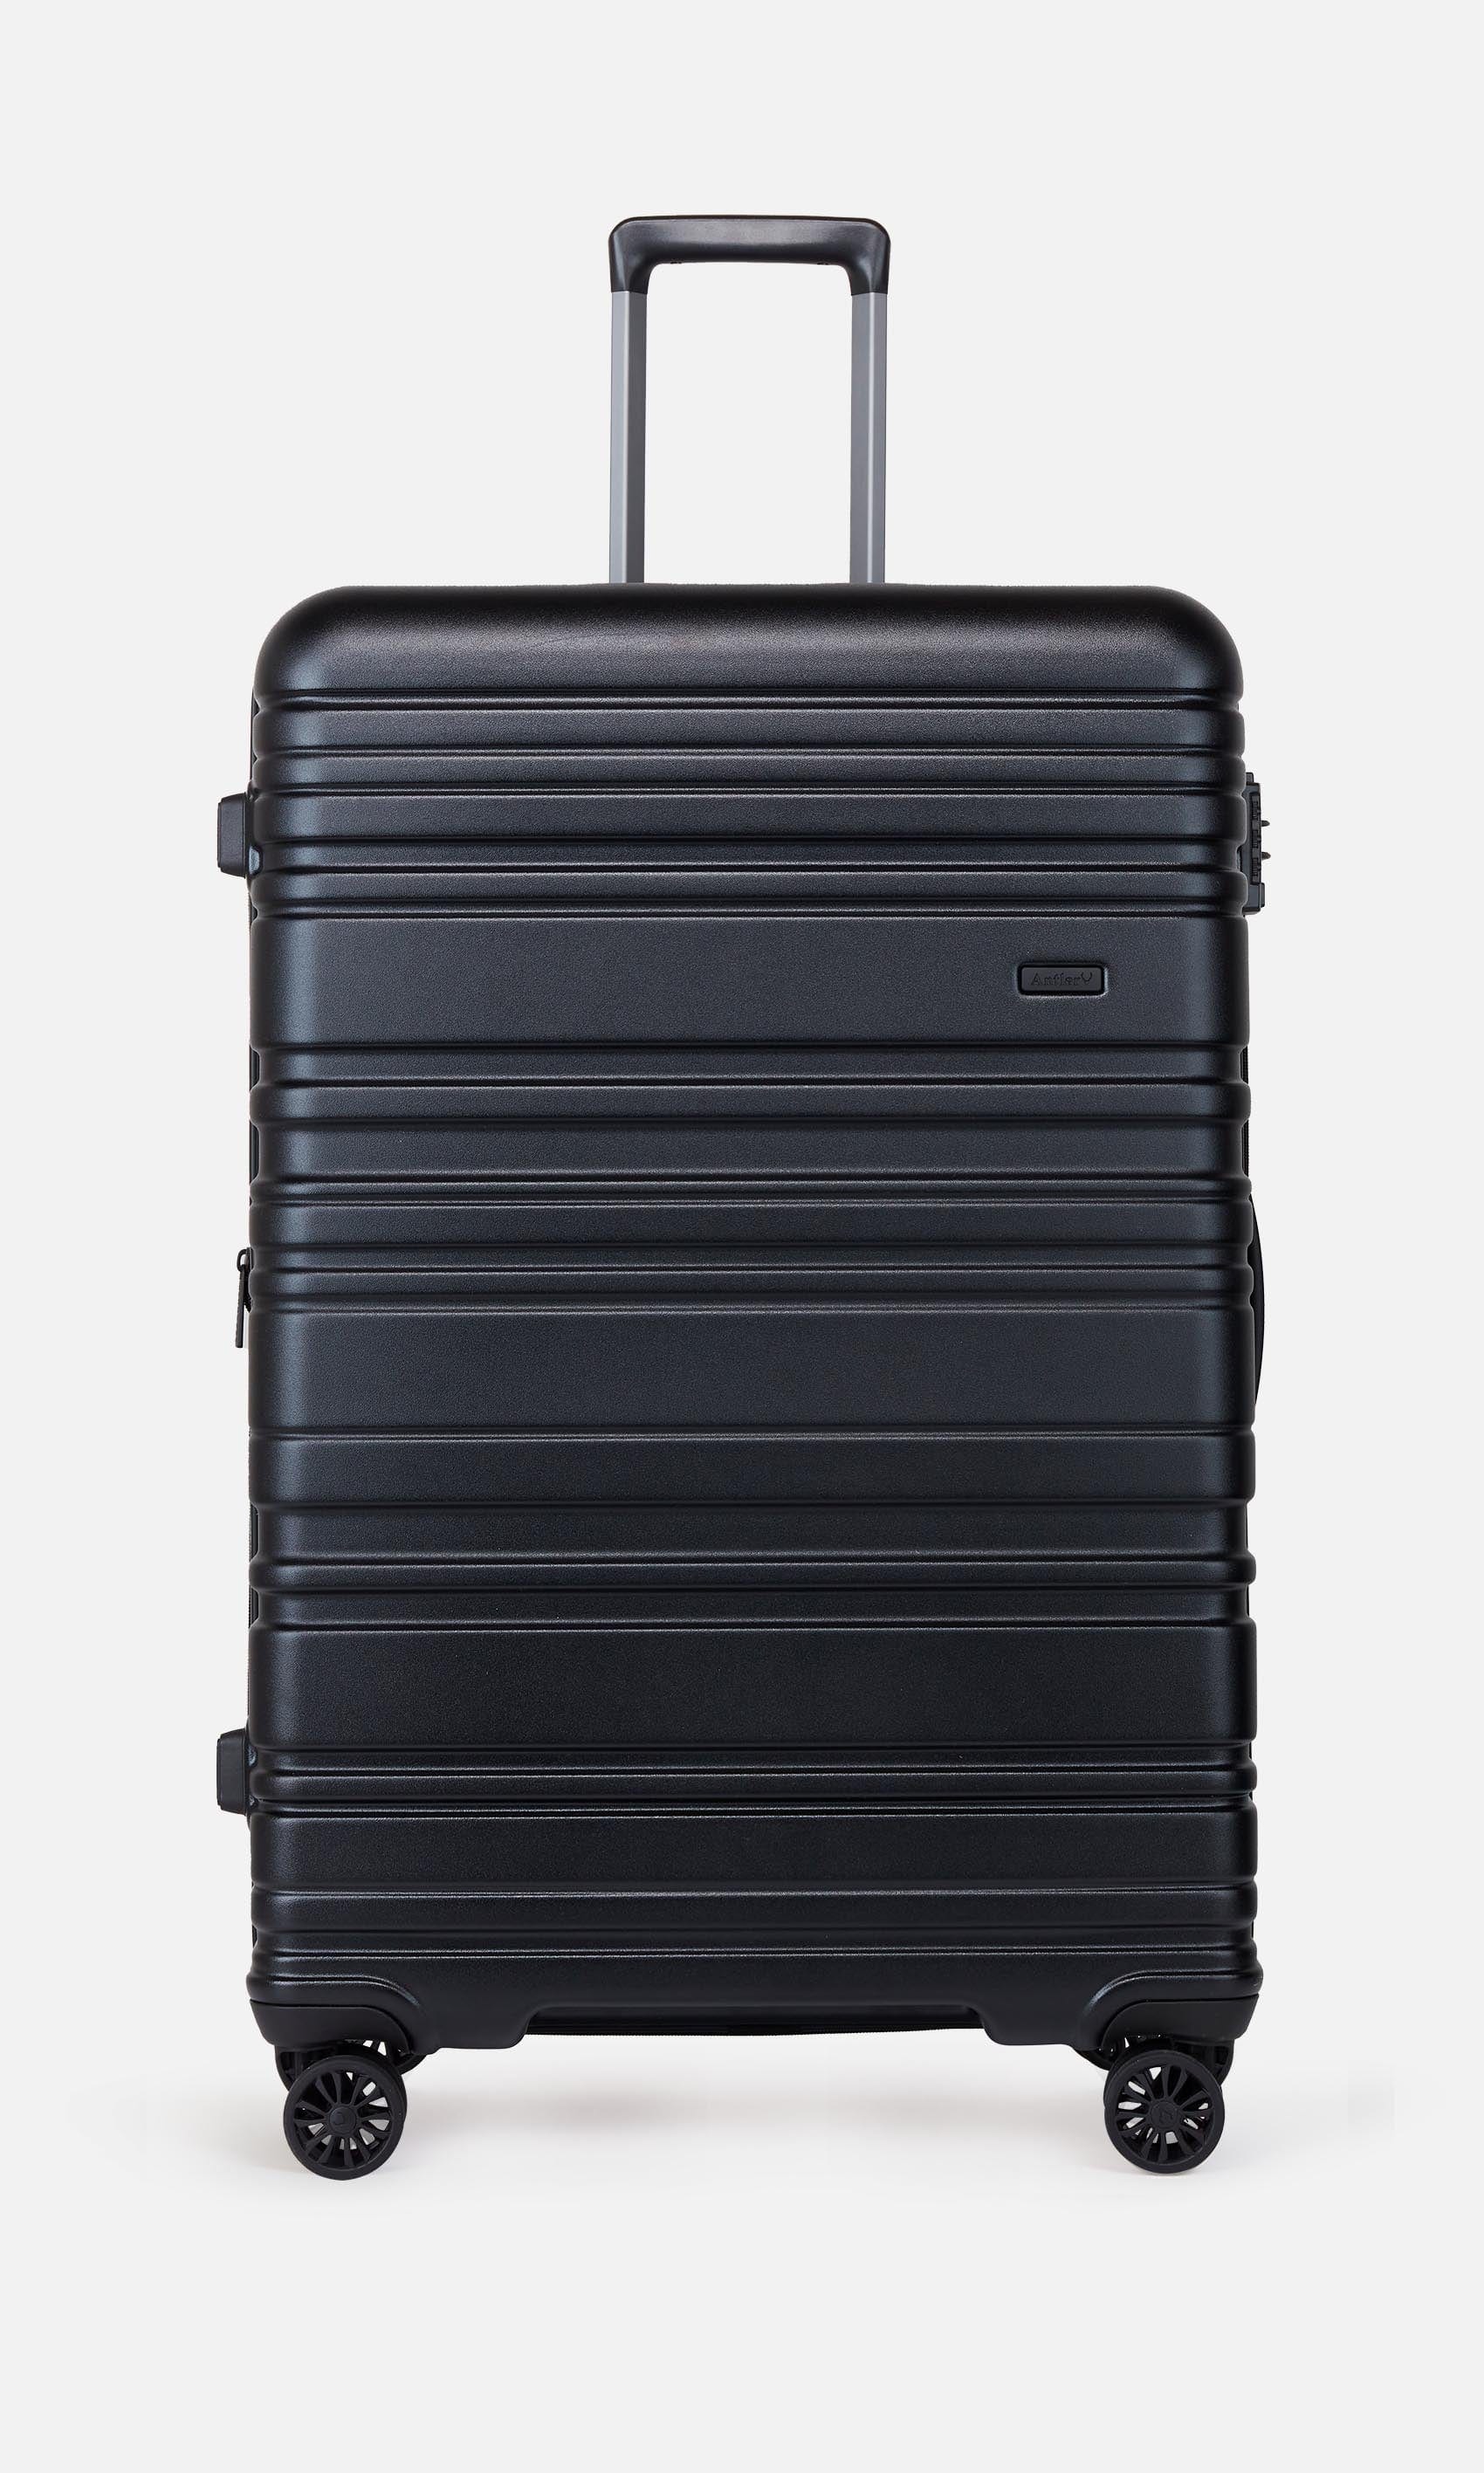 View Antler Saturn Large Suitcase In Black Size 537 x 81 x 355 cm information